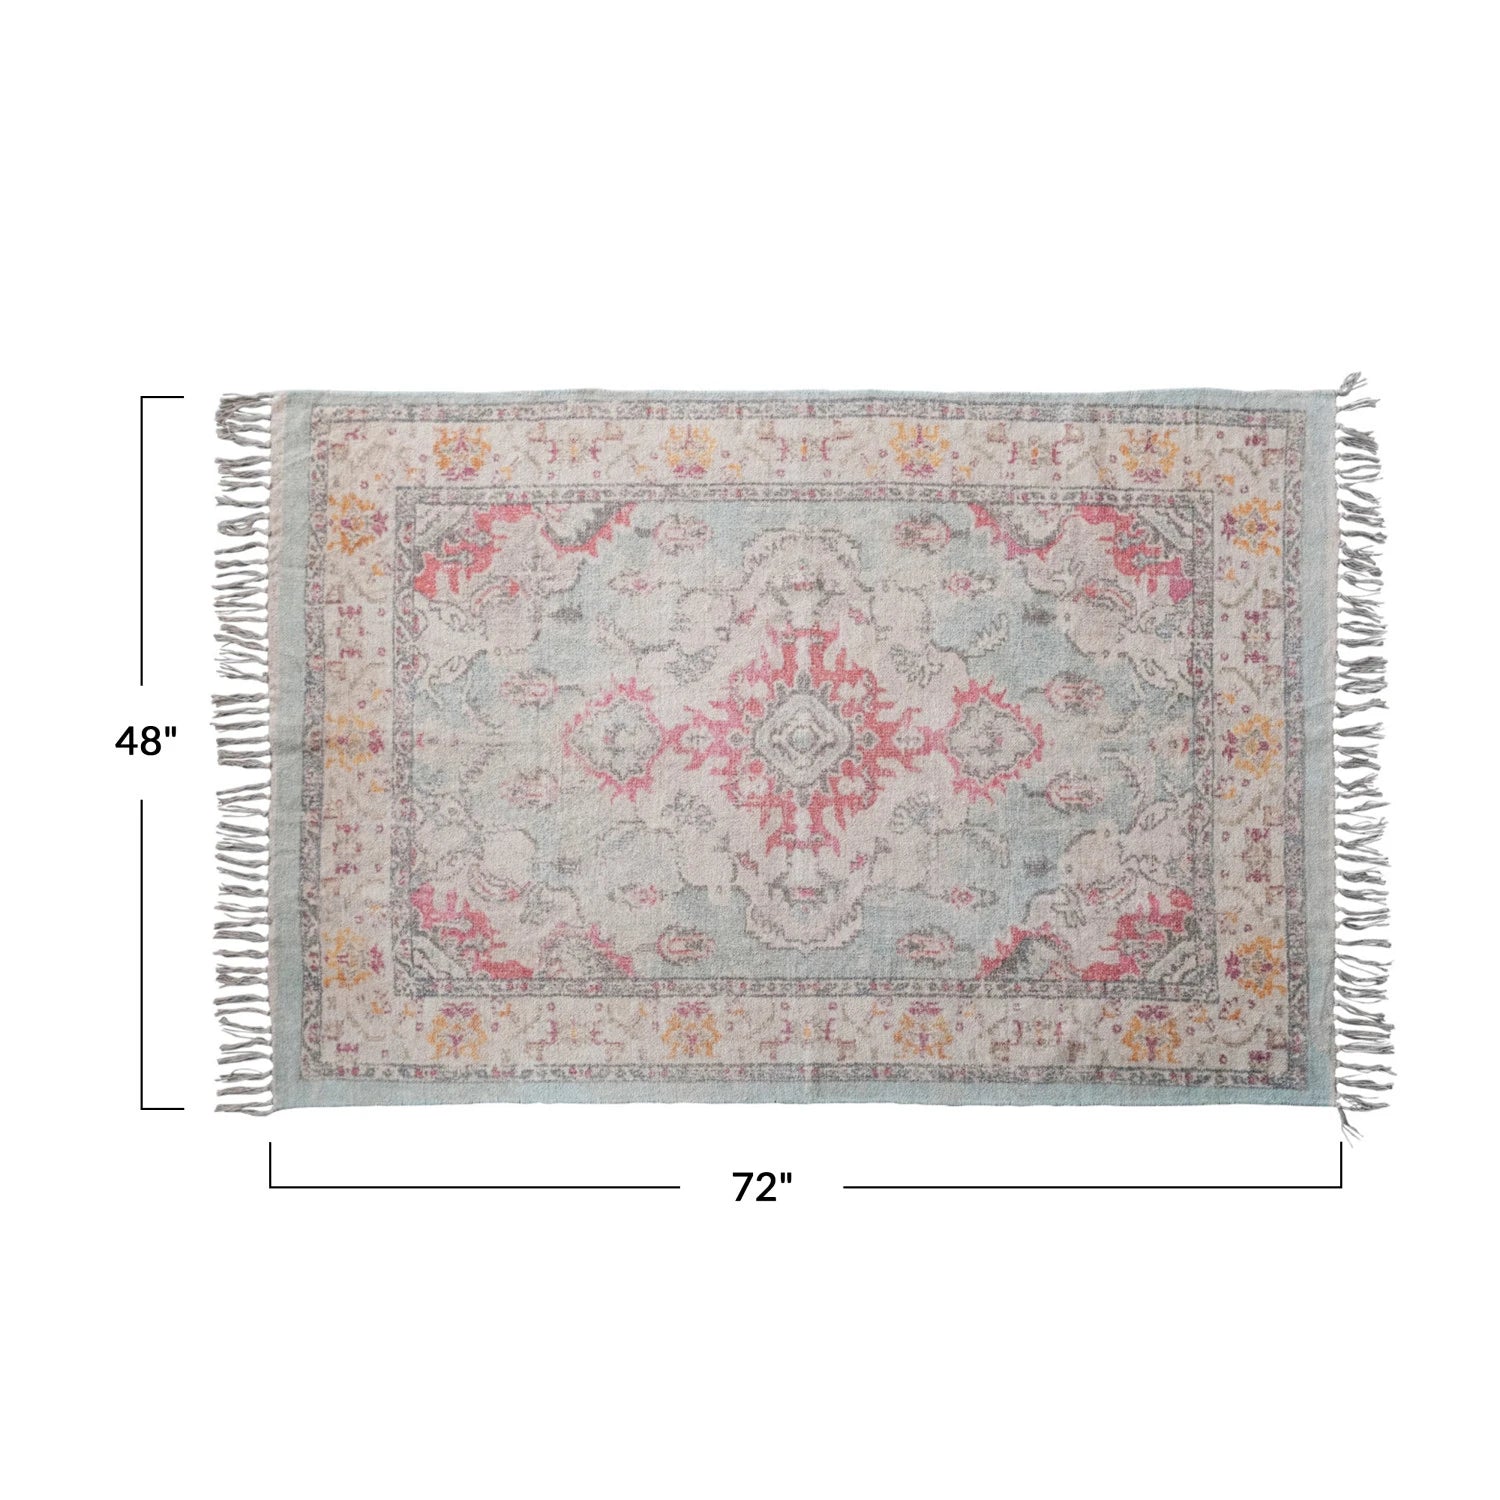 Measurements of th cotton chenille distressed print rug with fringe.